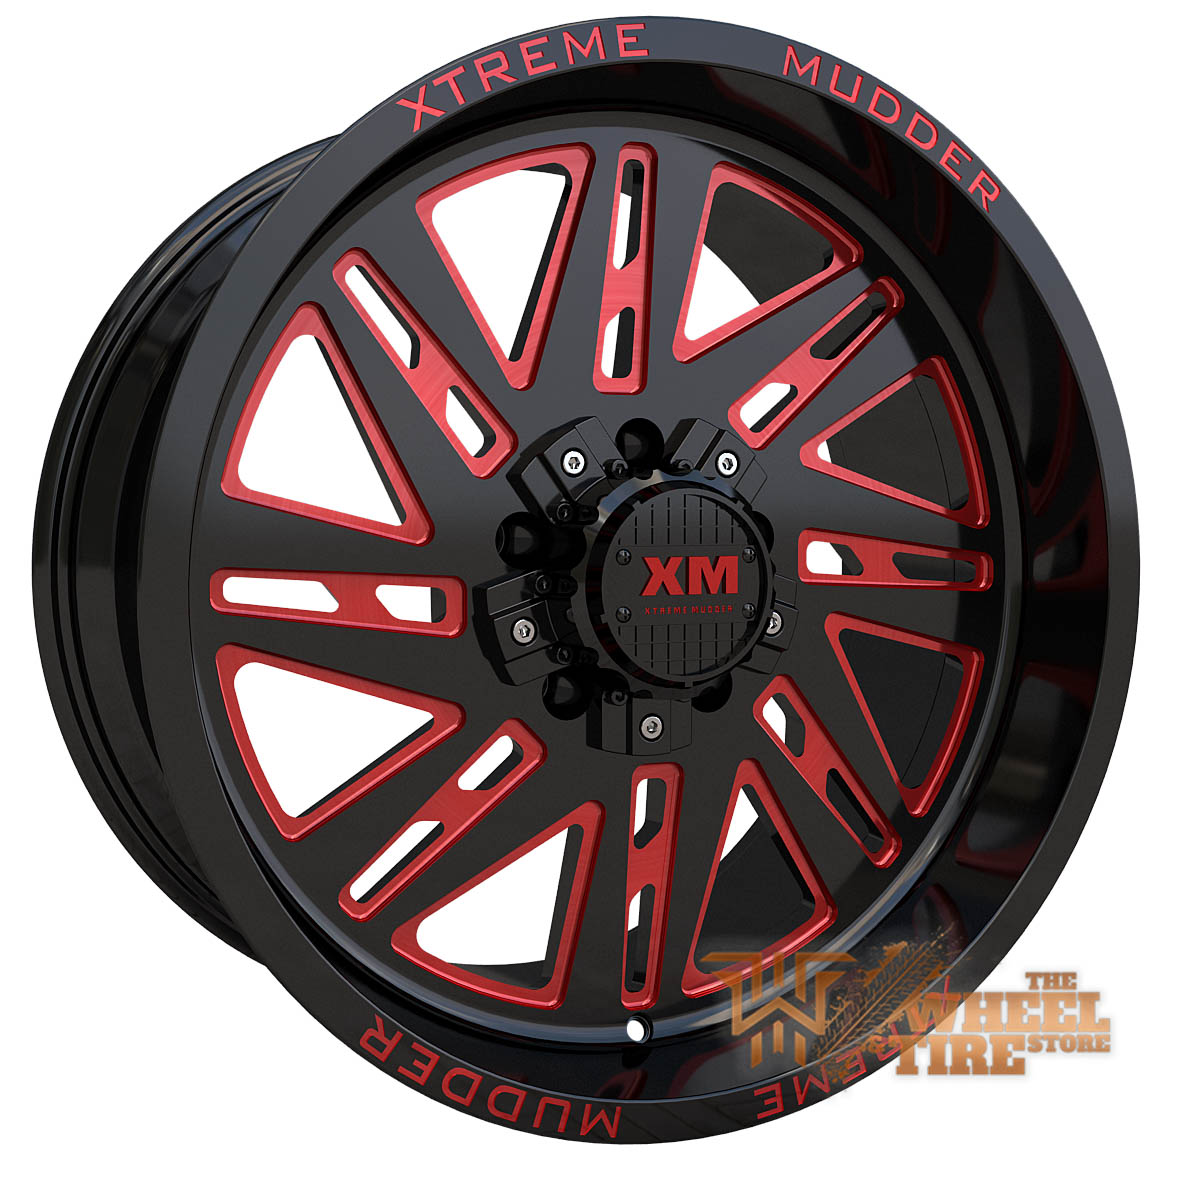 XTREME MUDDER XM-347 Wheel in Gloss Black Red Milled (Set of 4)